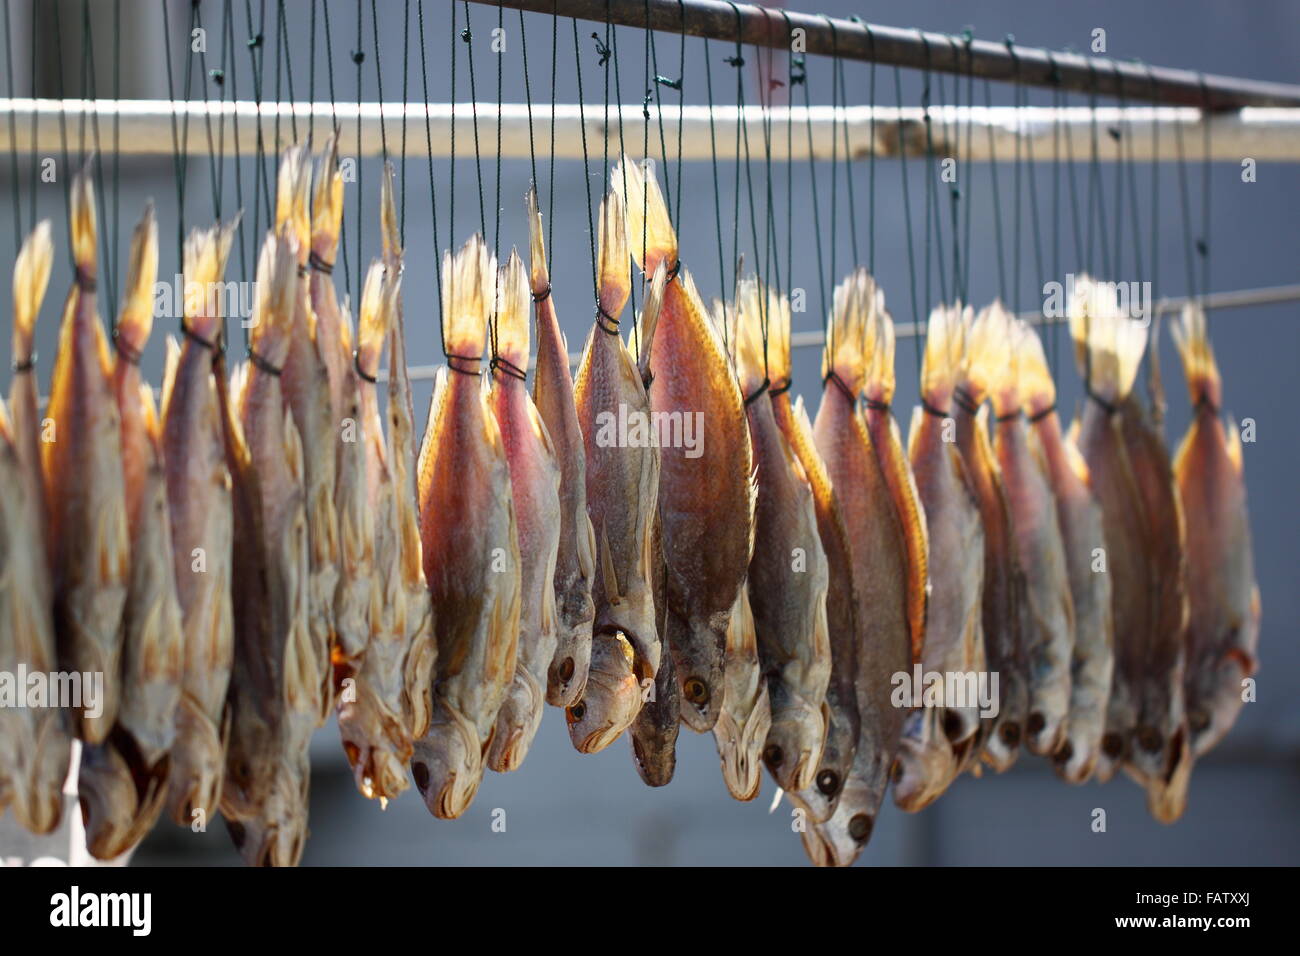 Dry fish in the sunlight Stock Photo